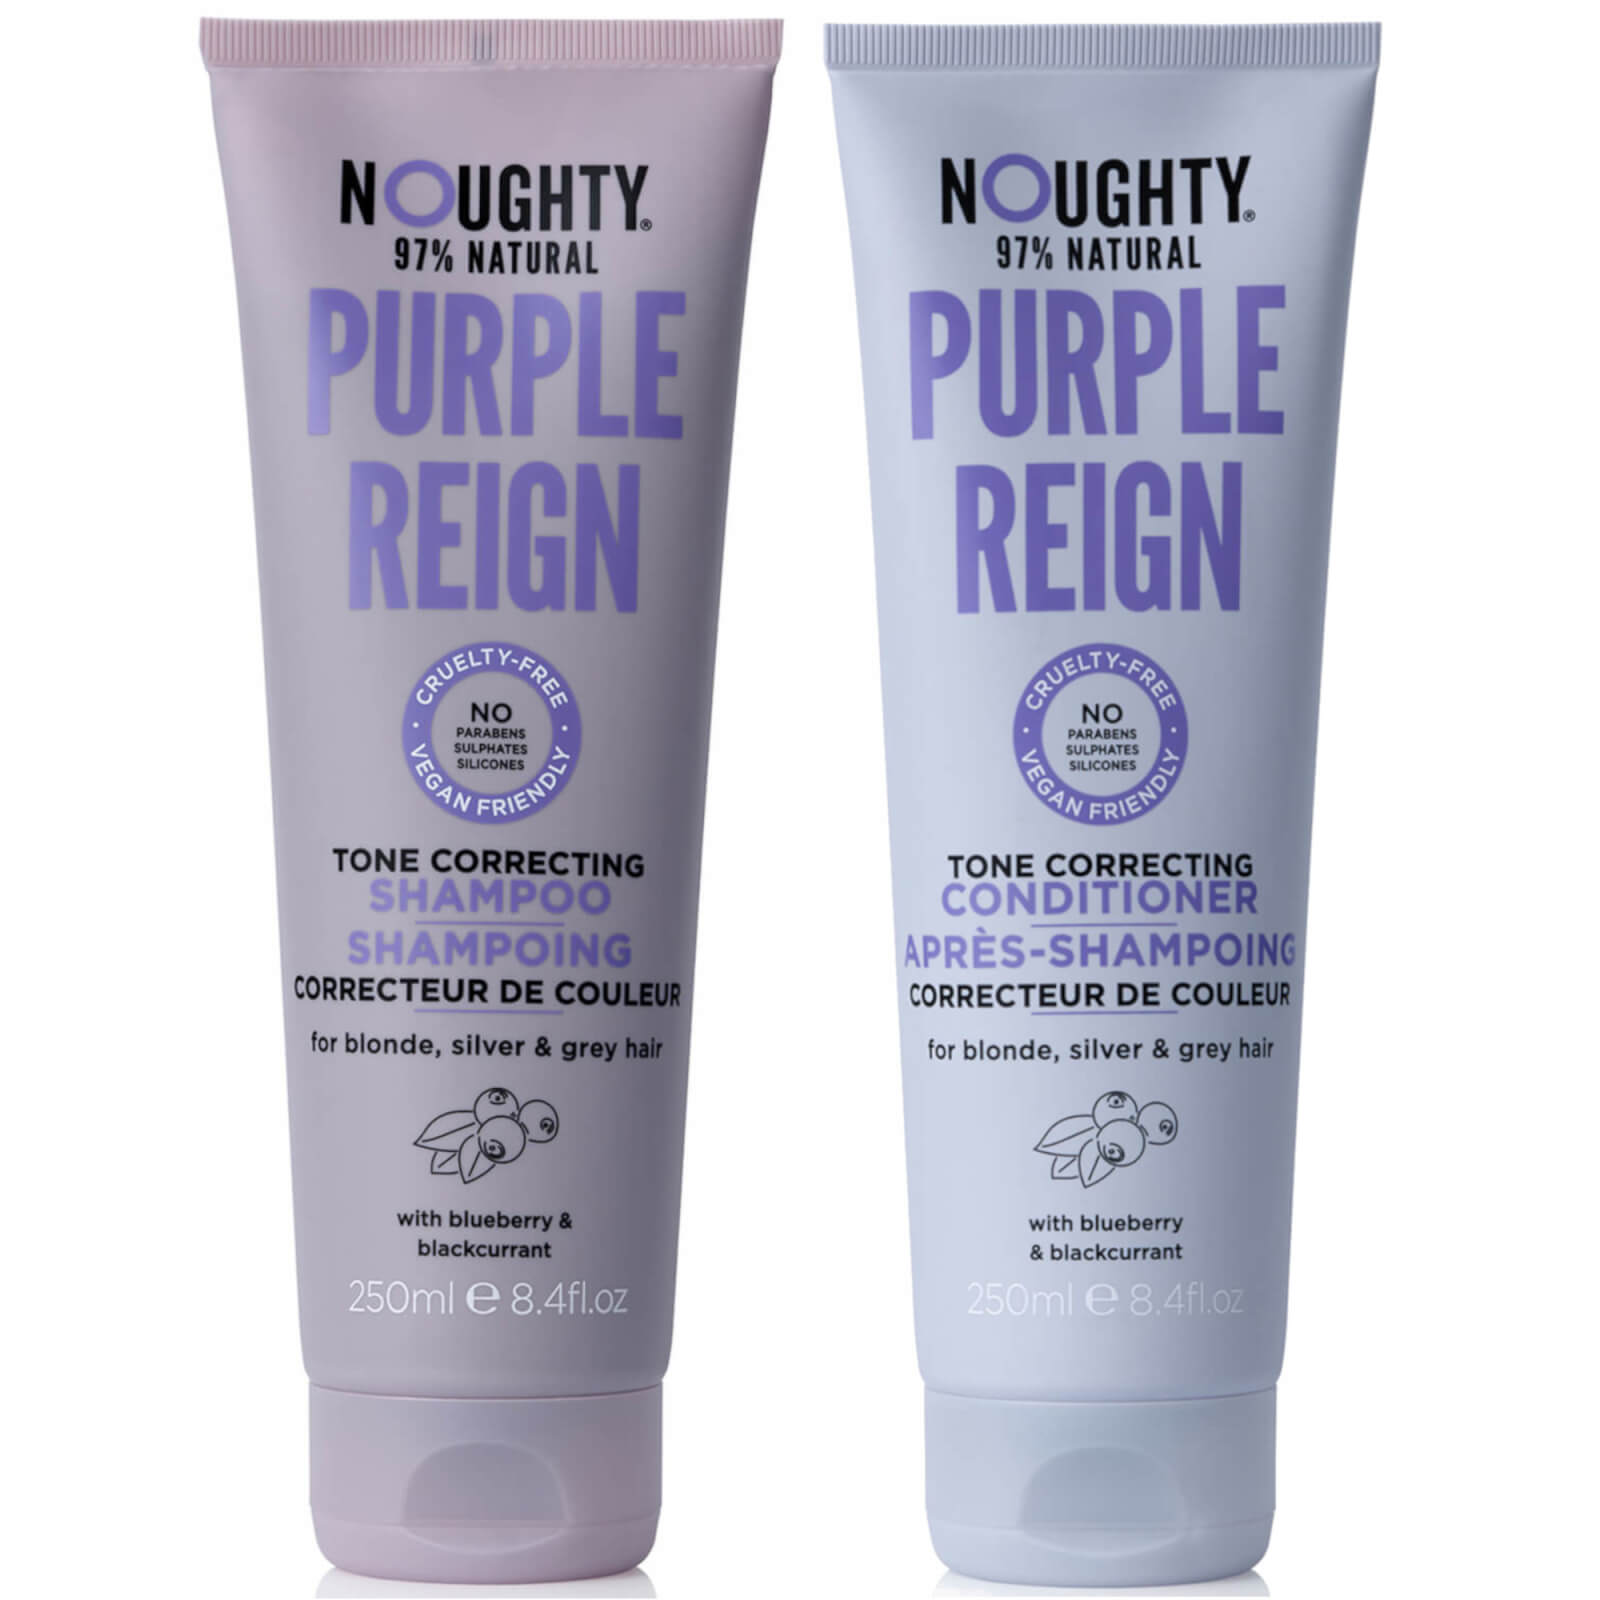 Noughty Purple Reign Shampoo And Conditioner Duo Bundle